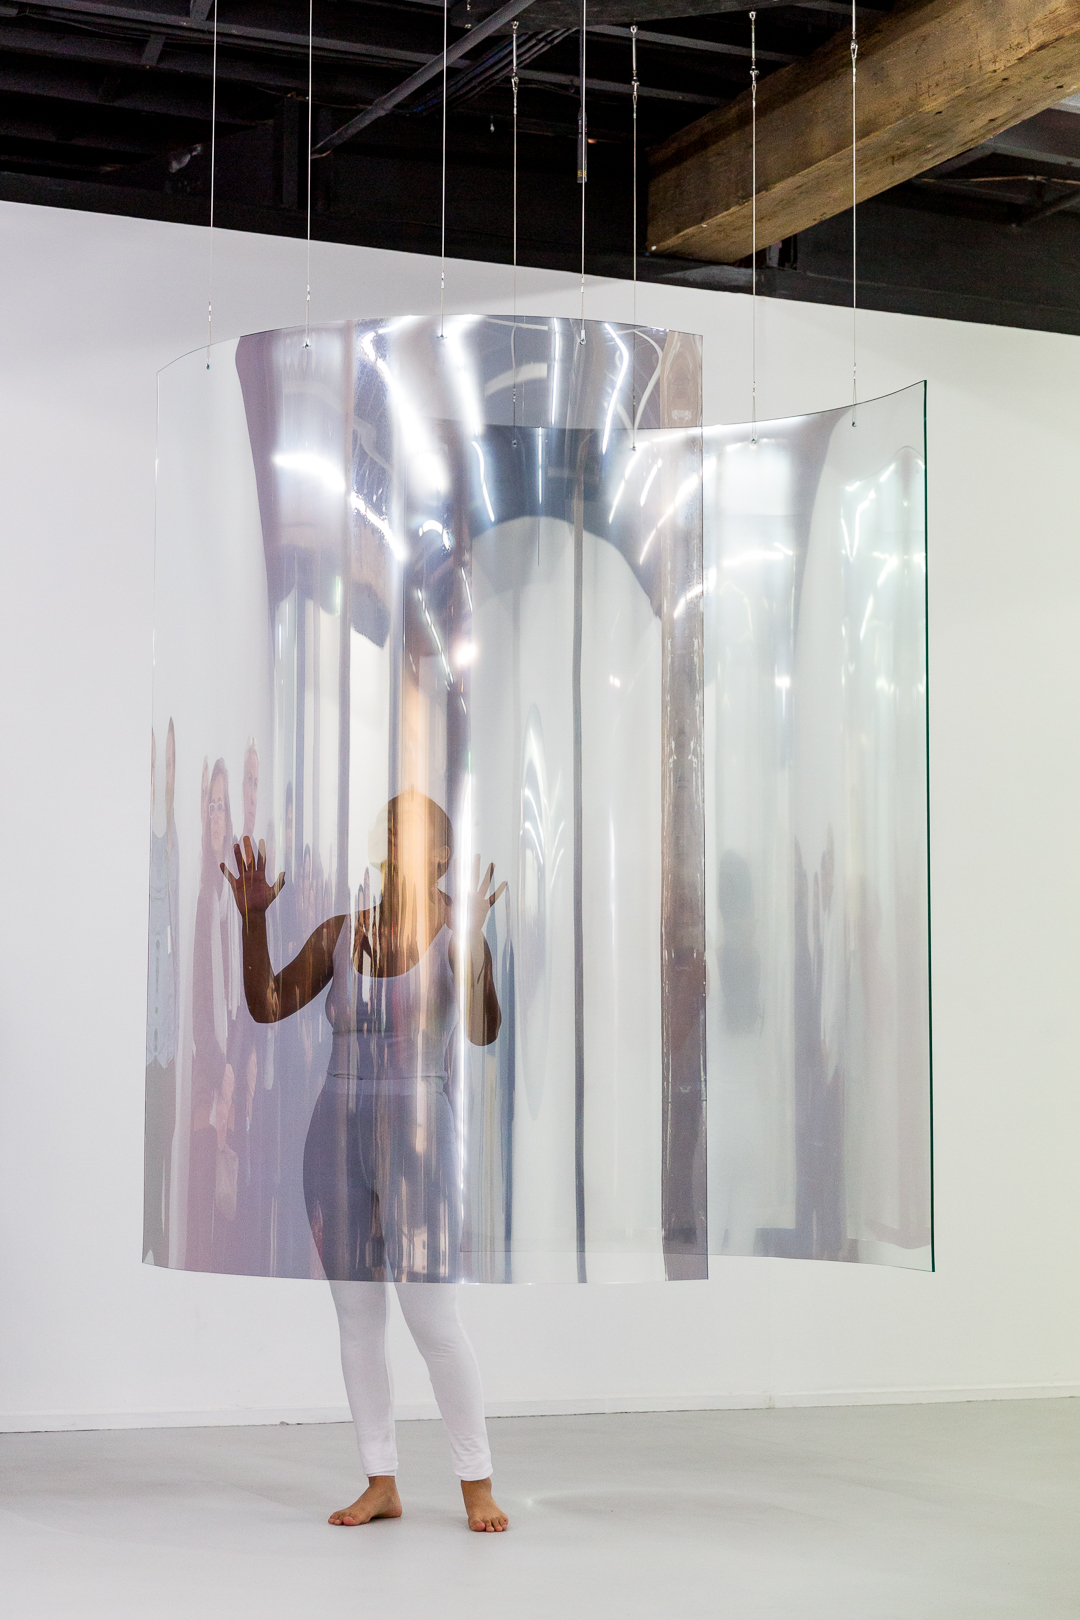 Mel O’Callaghan, Respire, respire, 2019 performance and installation at Artspace, Sydney, courtesy the artist and Kronenberg Mais Wright, Sydney; Galerie Allen, Paris; Belo-Galsterer, Lisbon. Photograph by Document Photography